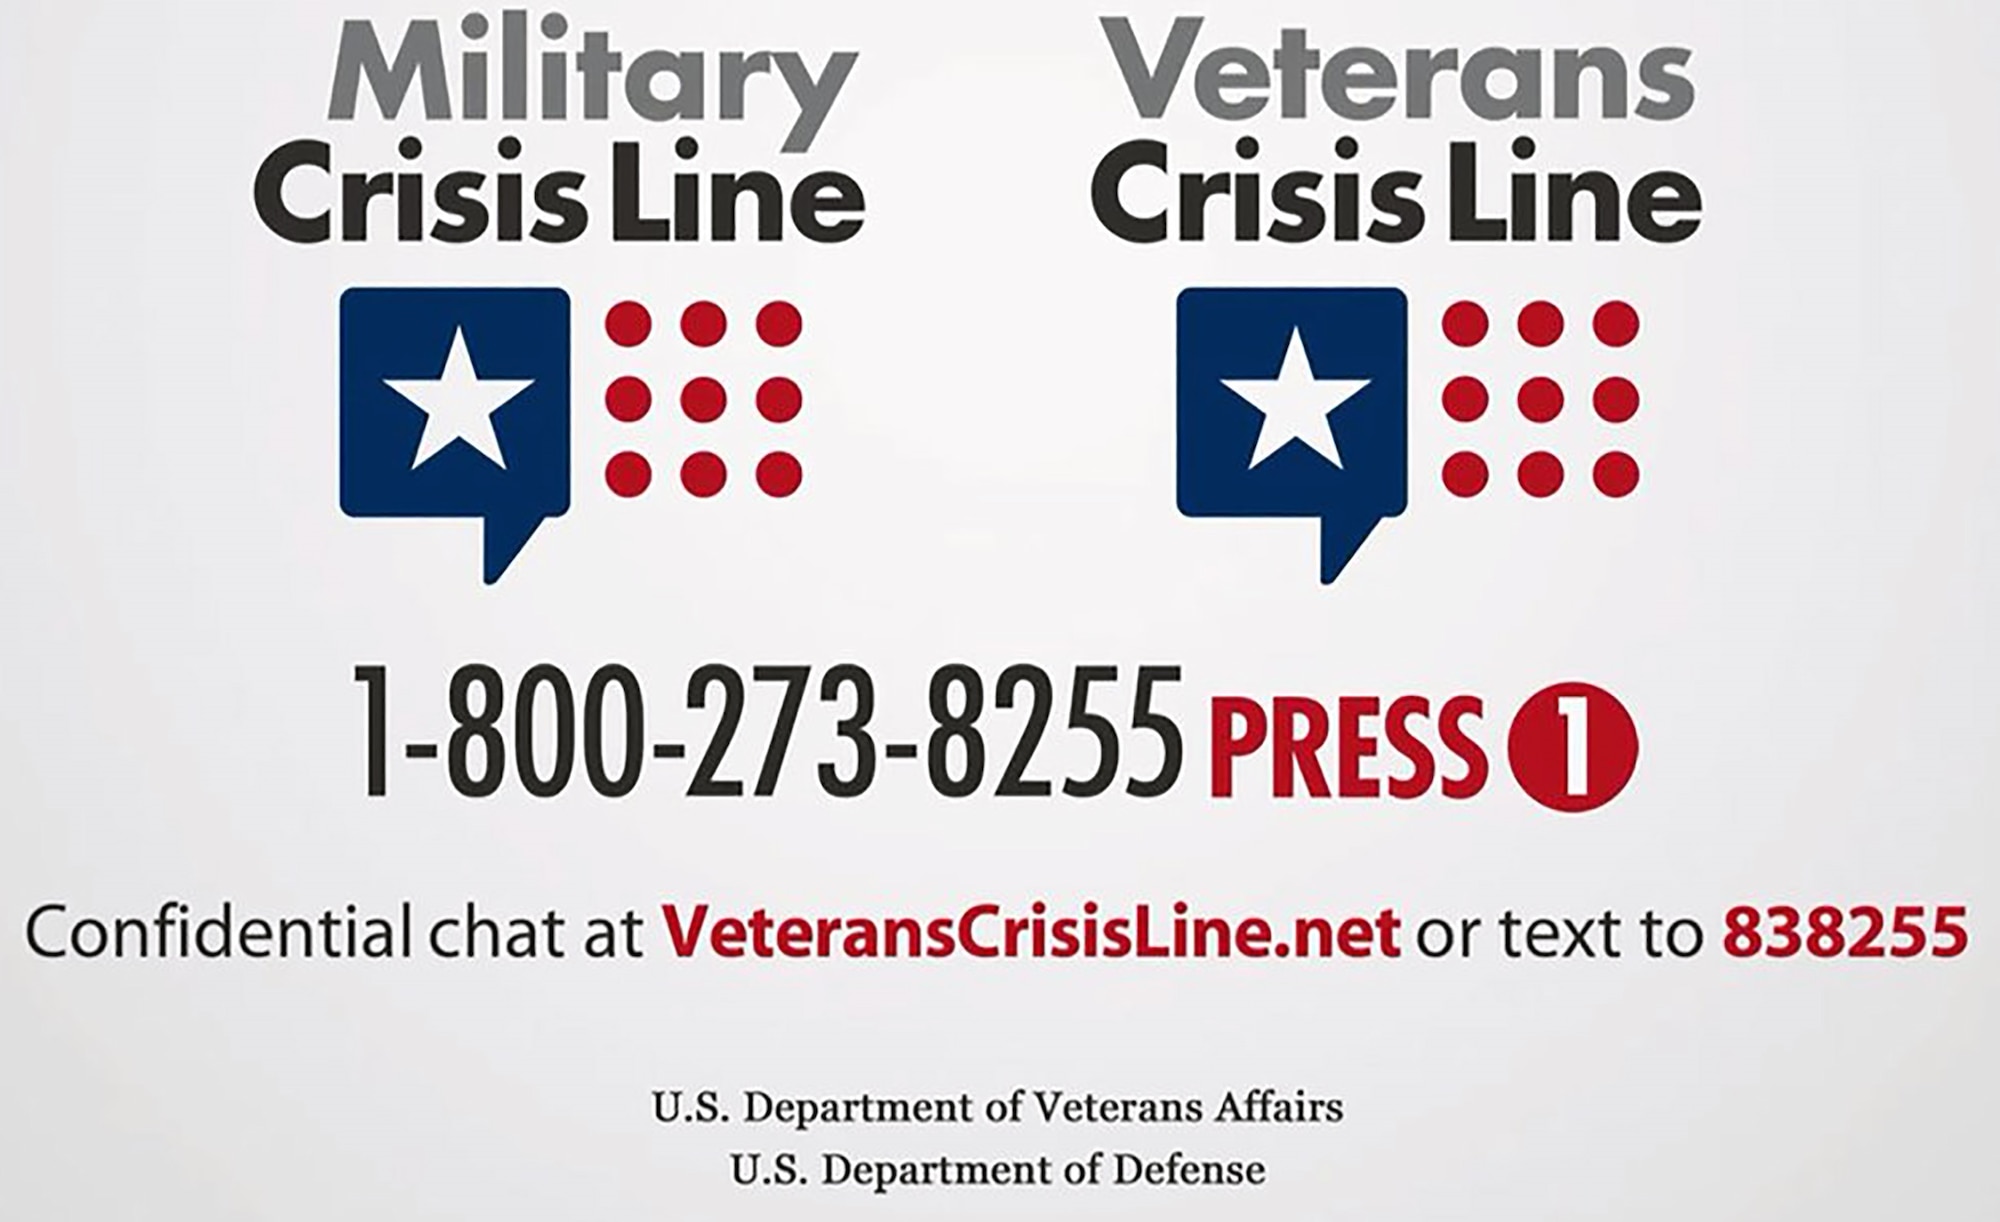 September is Suicide Awareness and Prevention Month and this year’s theme is “Connect to Protect.” During this month, and throughout the year, it is important to take the time to reach out to connect with and protect our wingmen who may be in need or experiencing “life circumstances” that may be causing them a level of distress. (Department of Veterans Affairs graphic)